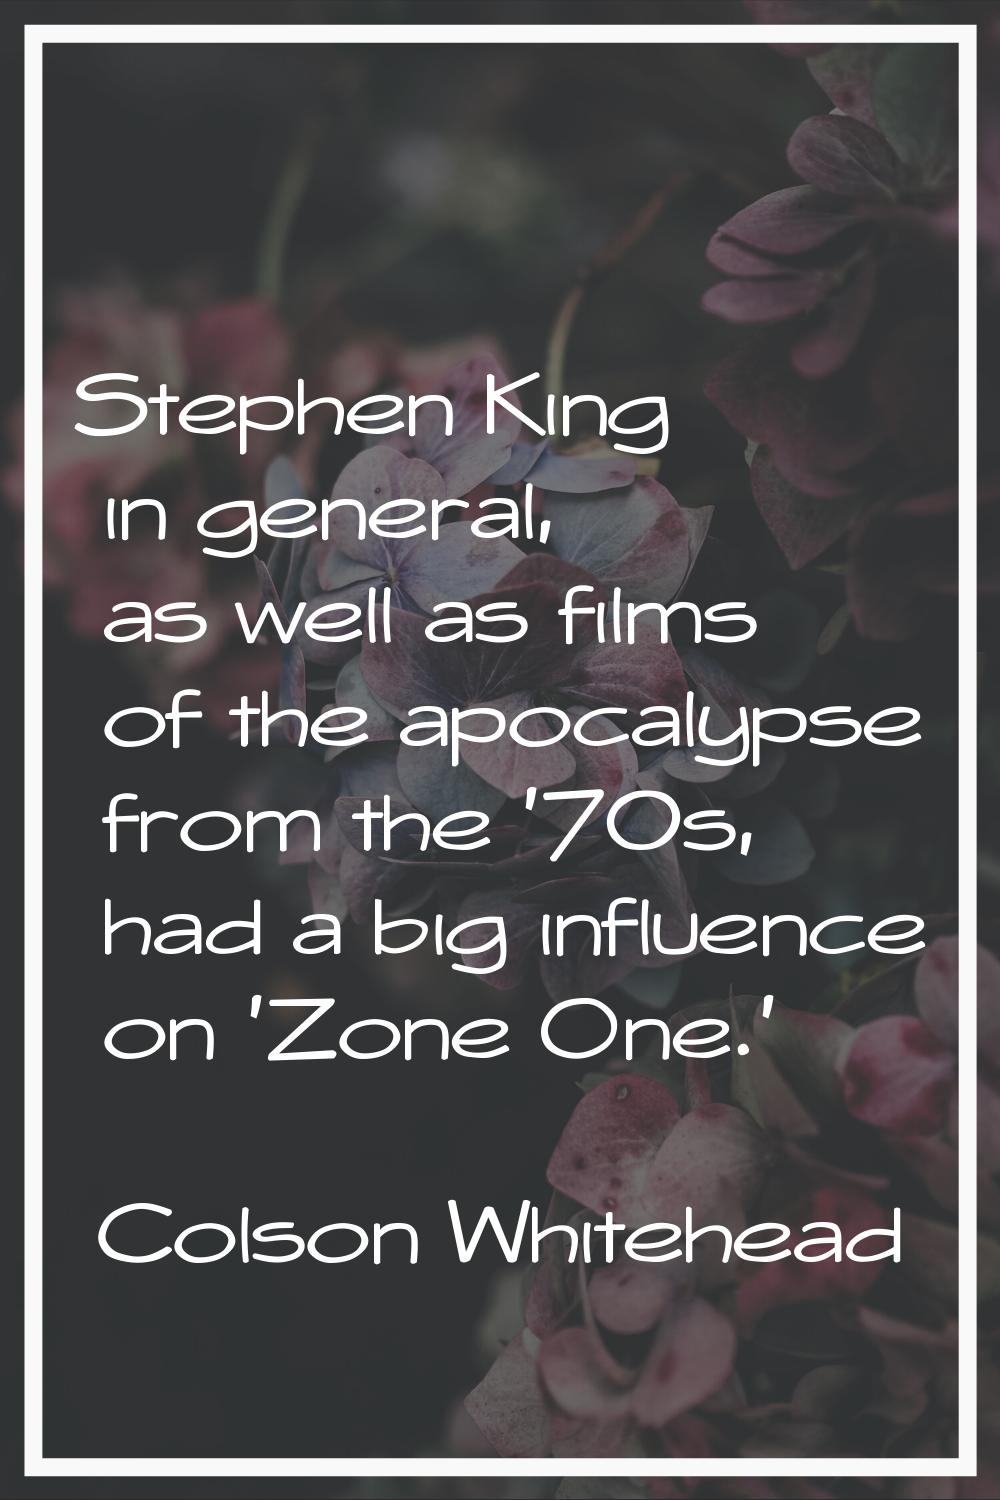 Stephen King in general, as well as films of the apocalypse from the '70s, had a big influence on '